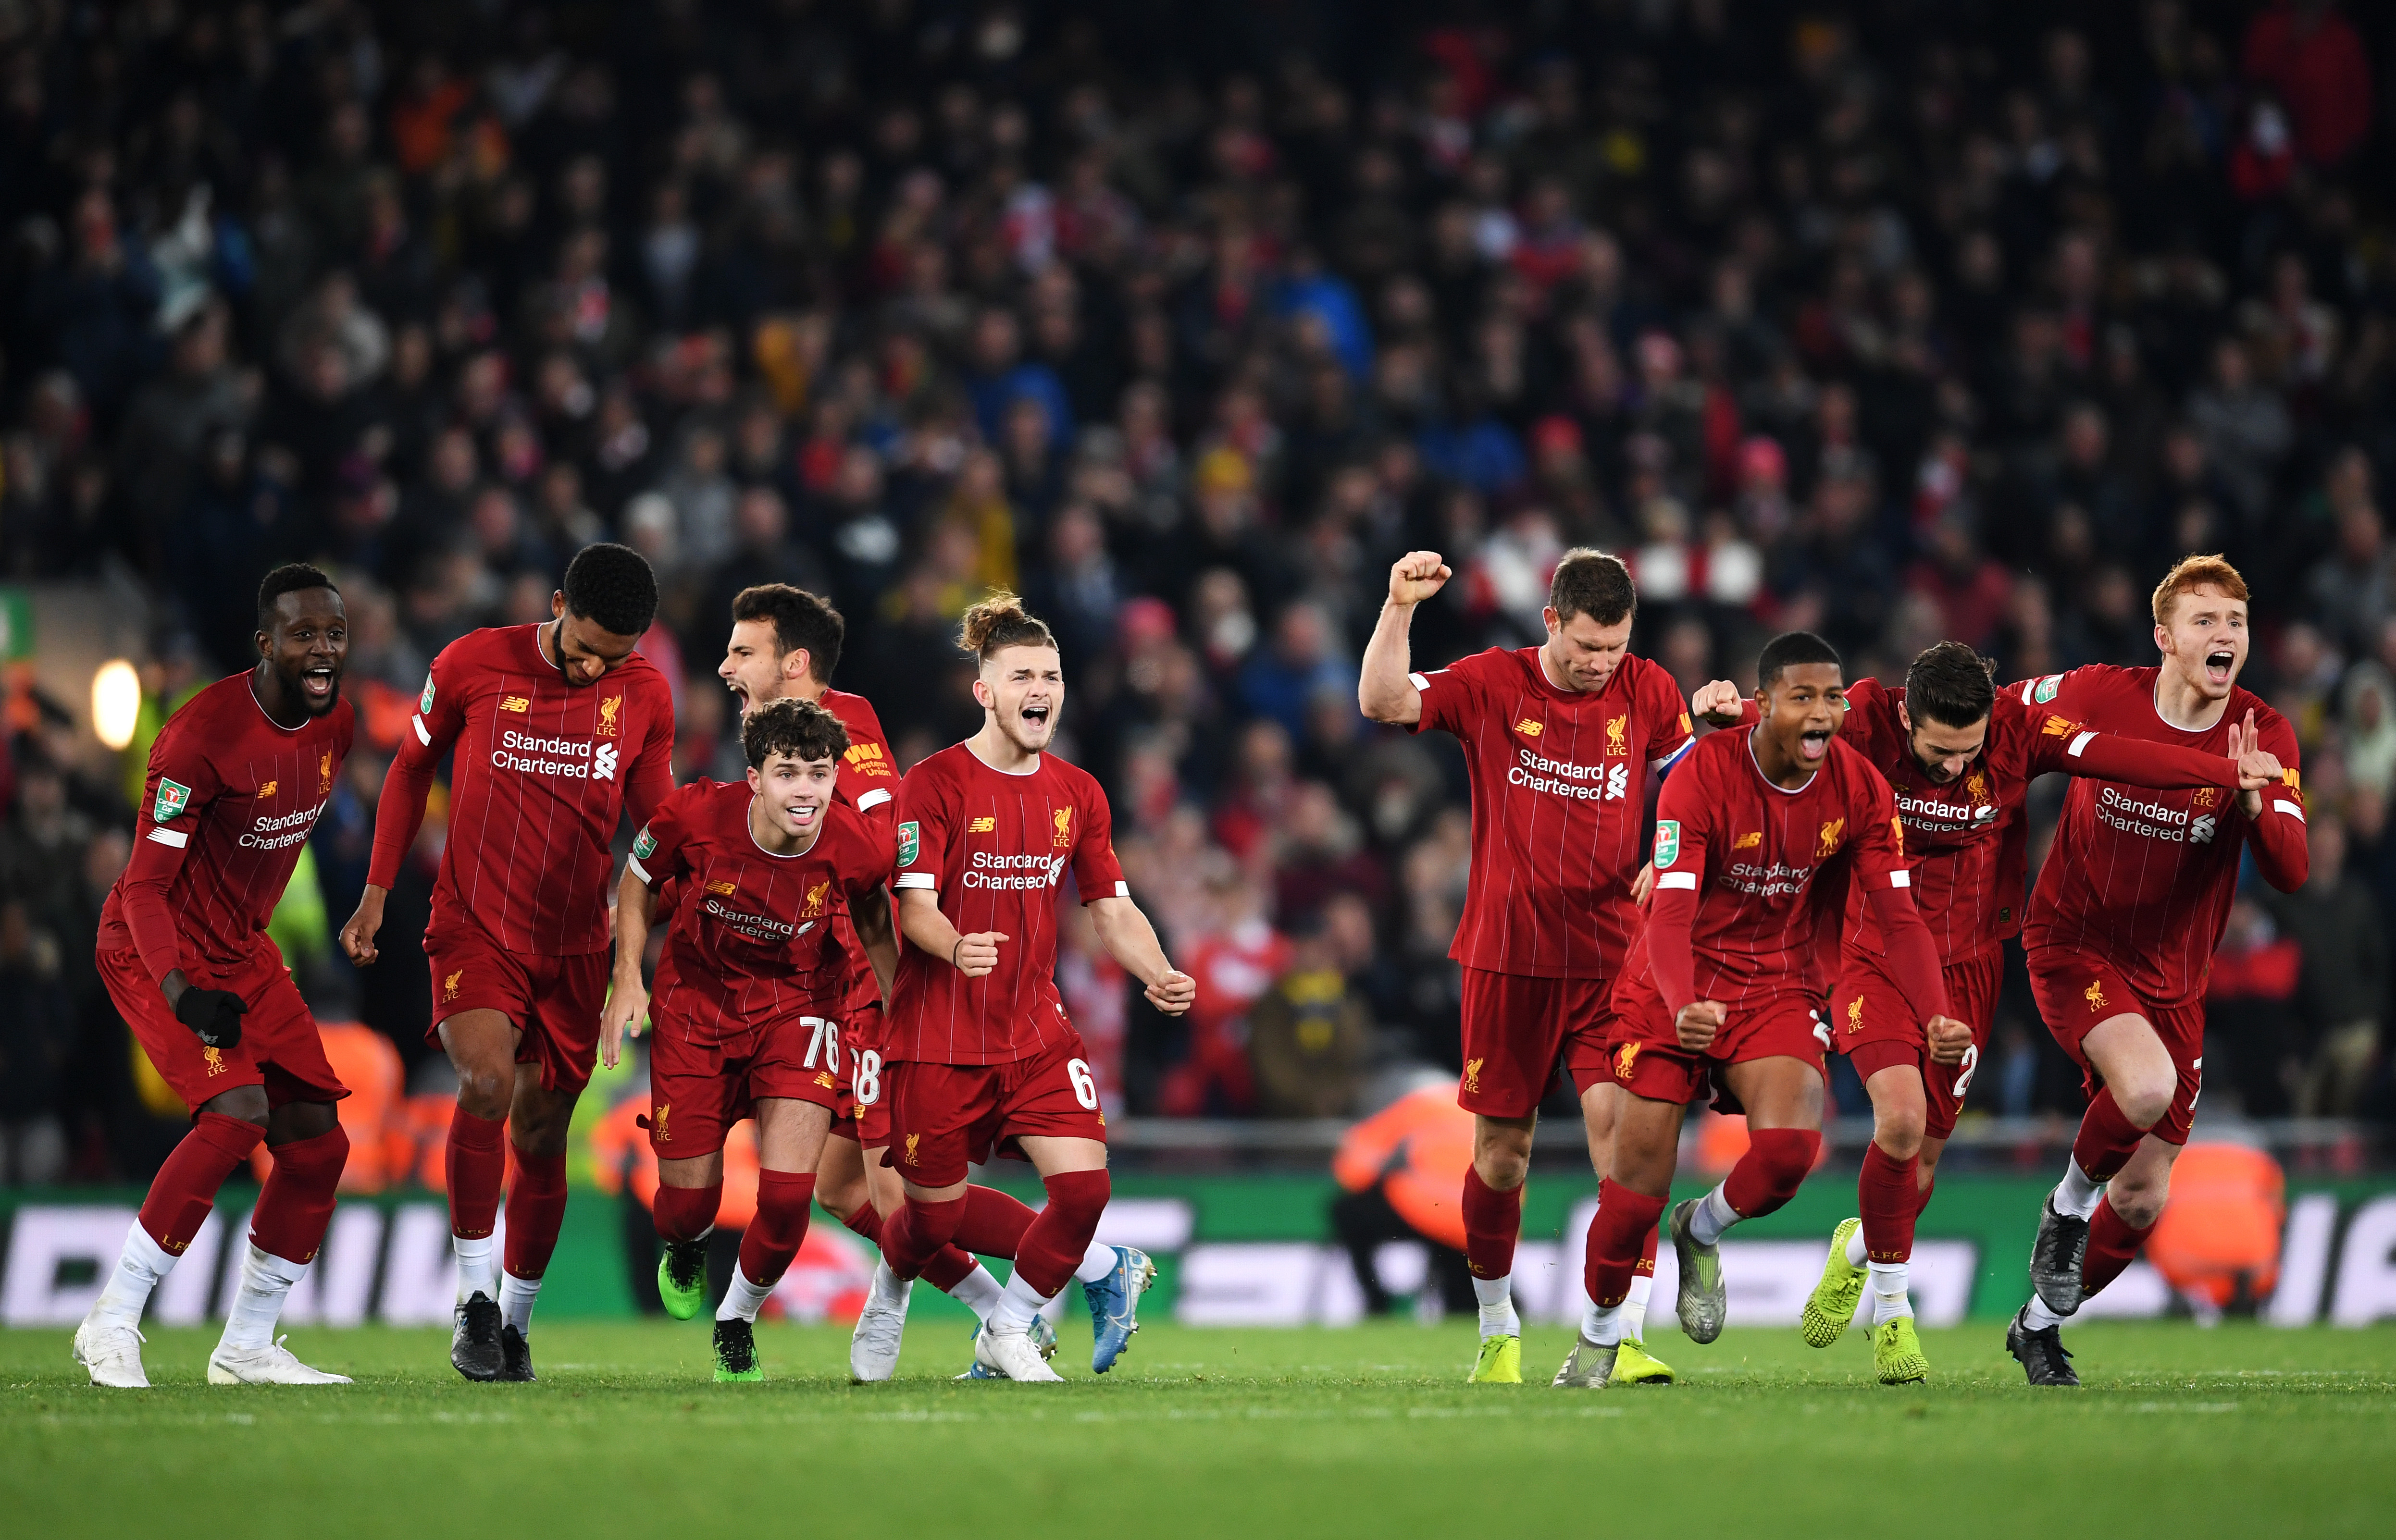 LIVERPOOL, ENGLAND - OCTOBER 30: (L-R) Divock Origi, Joe Gomez, Neco Williams, Harvey Elliott, James Milner, Rhian Brewster, Adam Lallana and Sepp Van Den Berg of Liverpool celebrate victory after Curtis Jones of Liverpool (jot pictured) scores his sides fifth penatly during the penalty shoot out during the Carabao Cup Round of 16 match between Liverpool and Arsenal at Anfield on October 30, 2019 in Liverpool, England. (Photo by Laurence Griffiths/Getty Images)